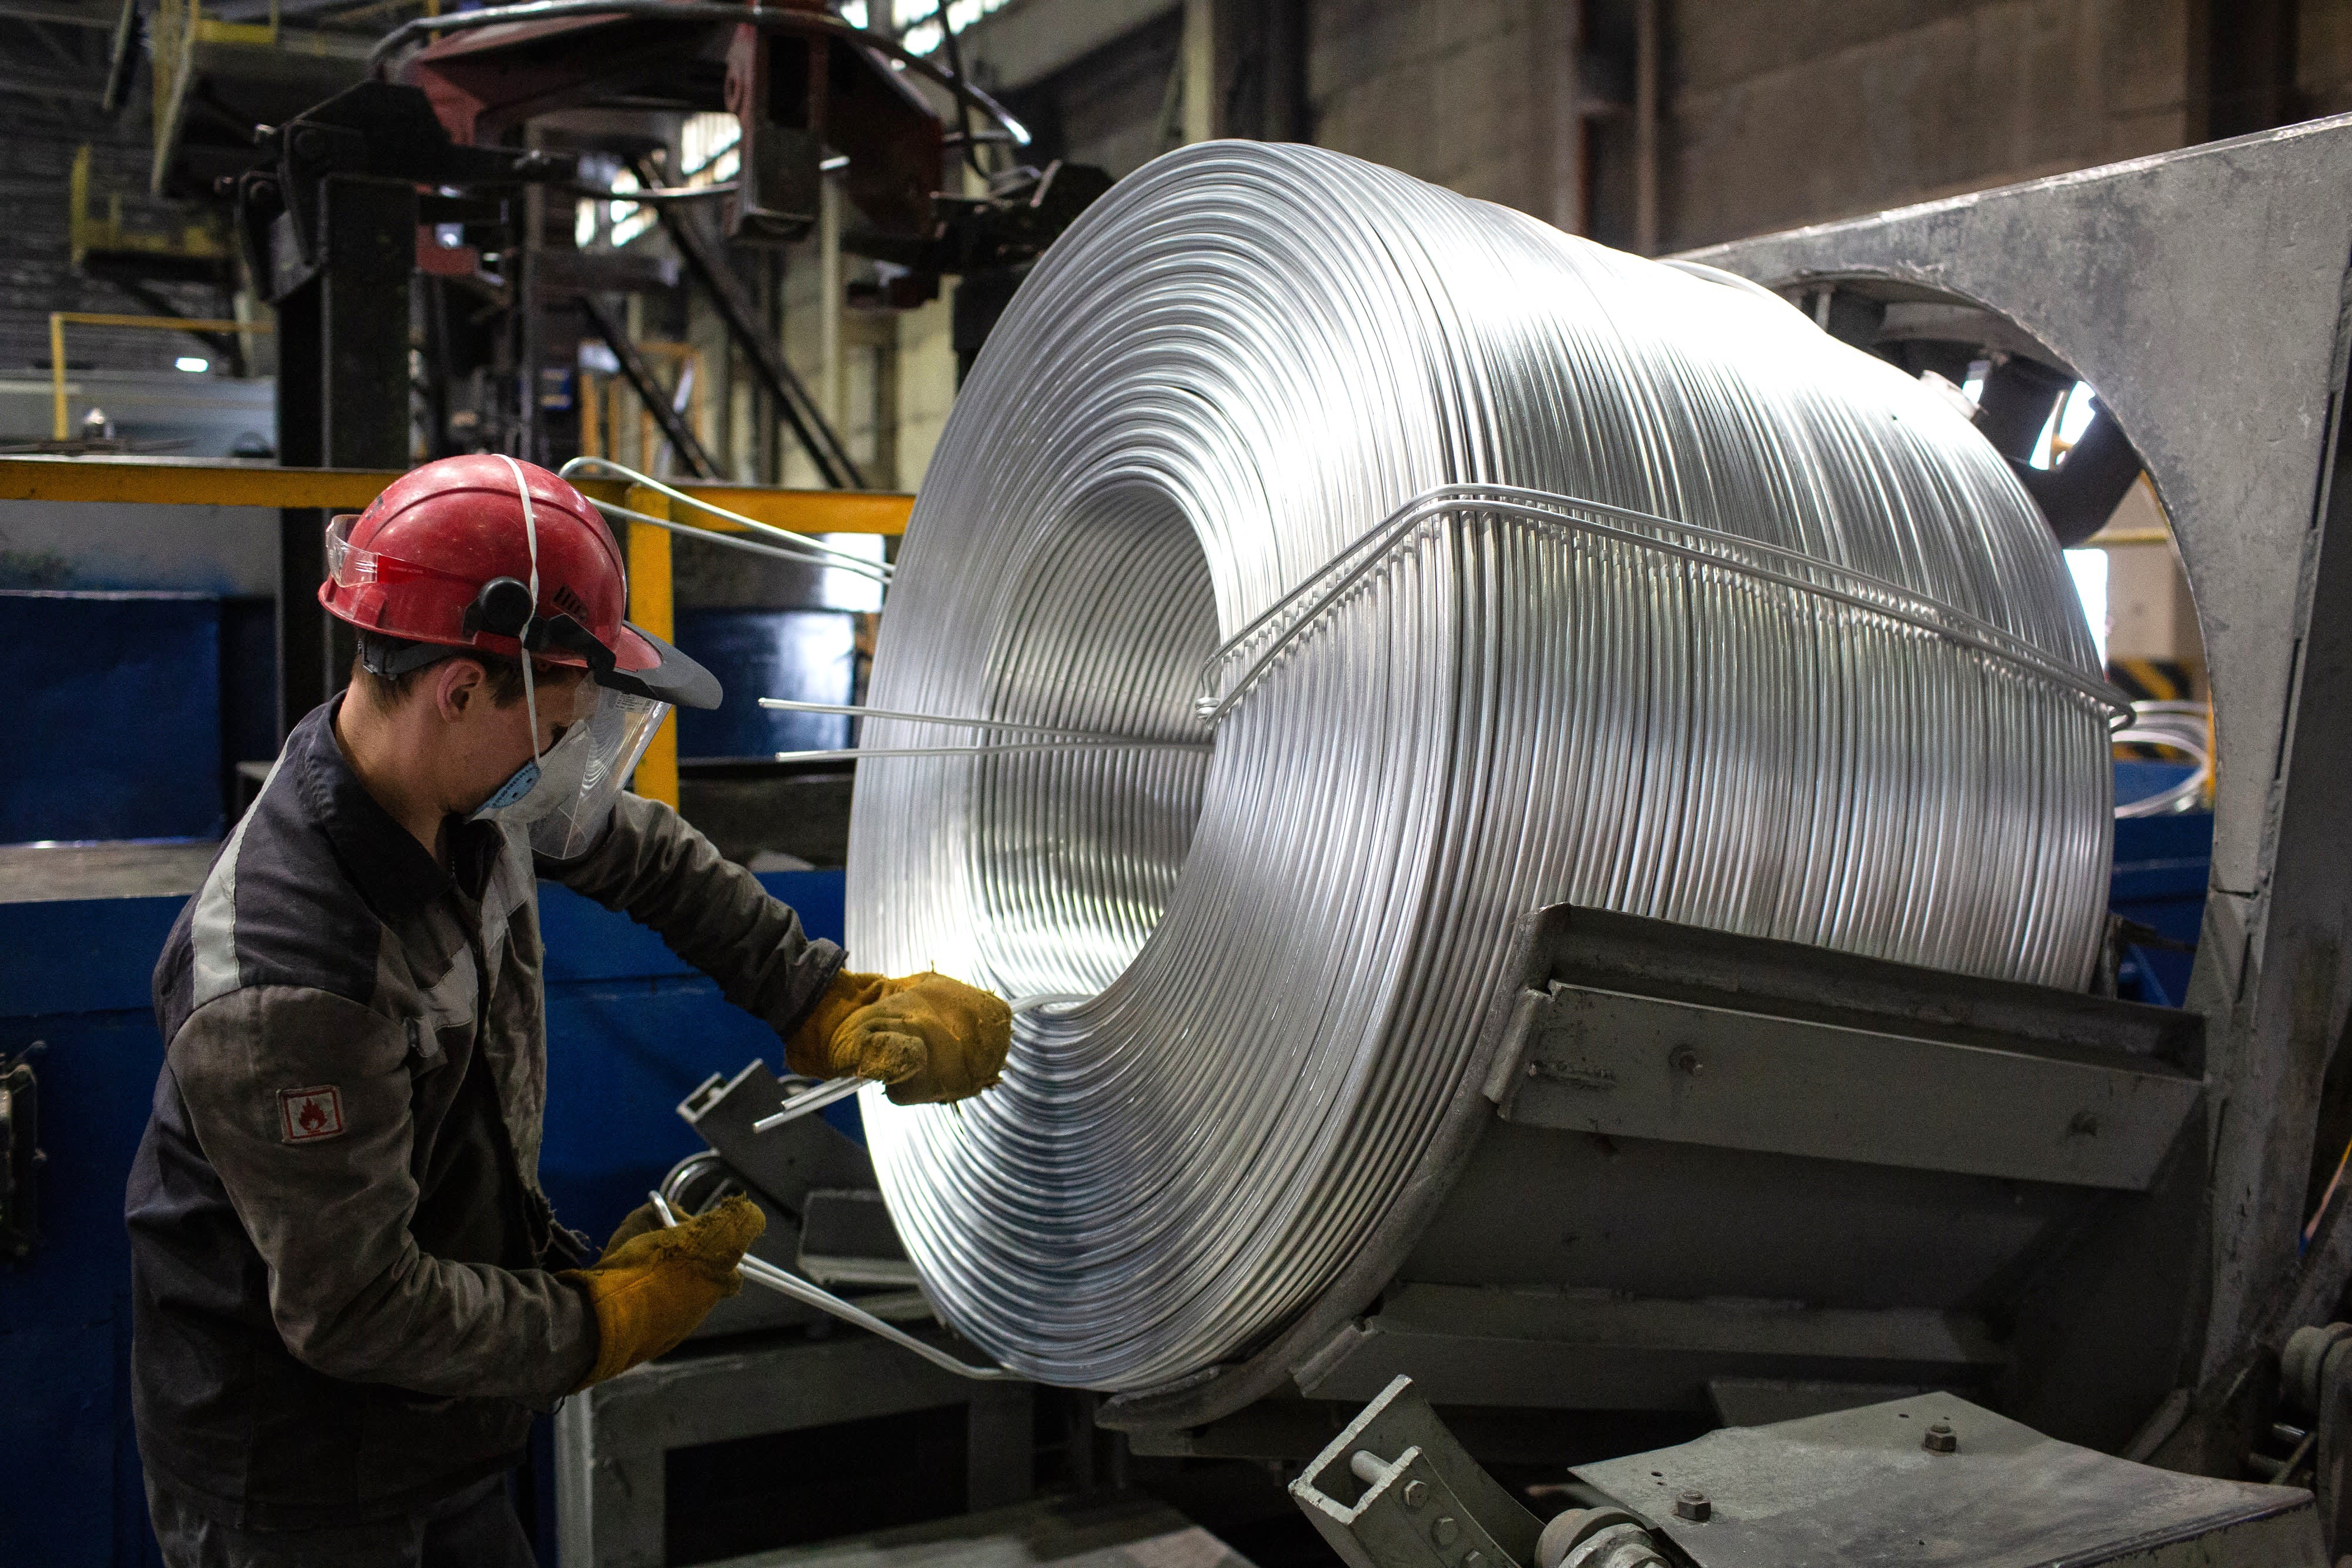 EU considers sanctions on Russian aluminium products imports, citing concern about green agenda and competitiveness